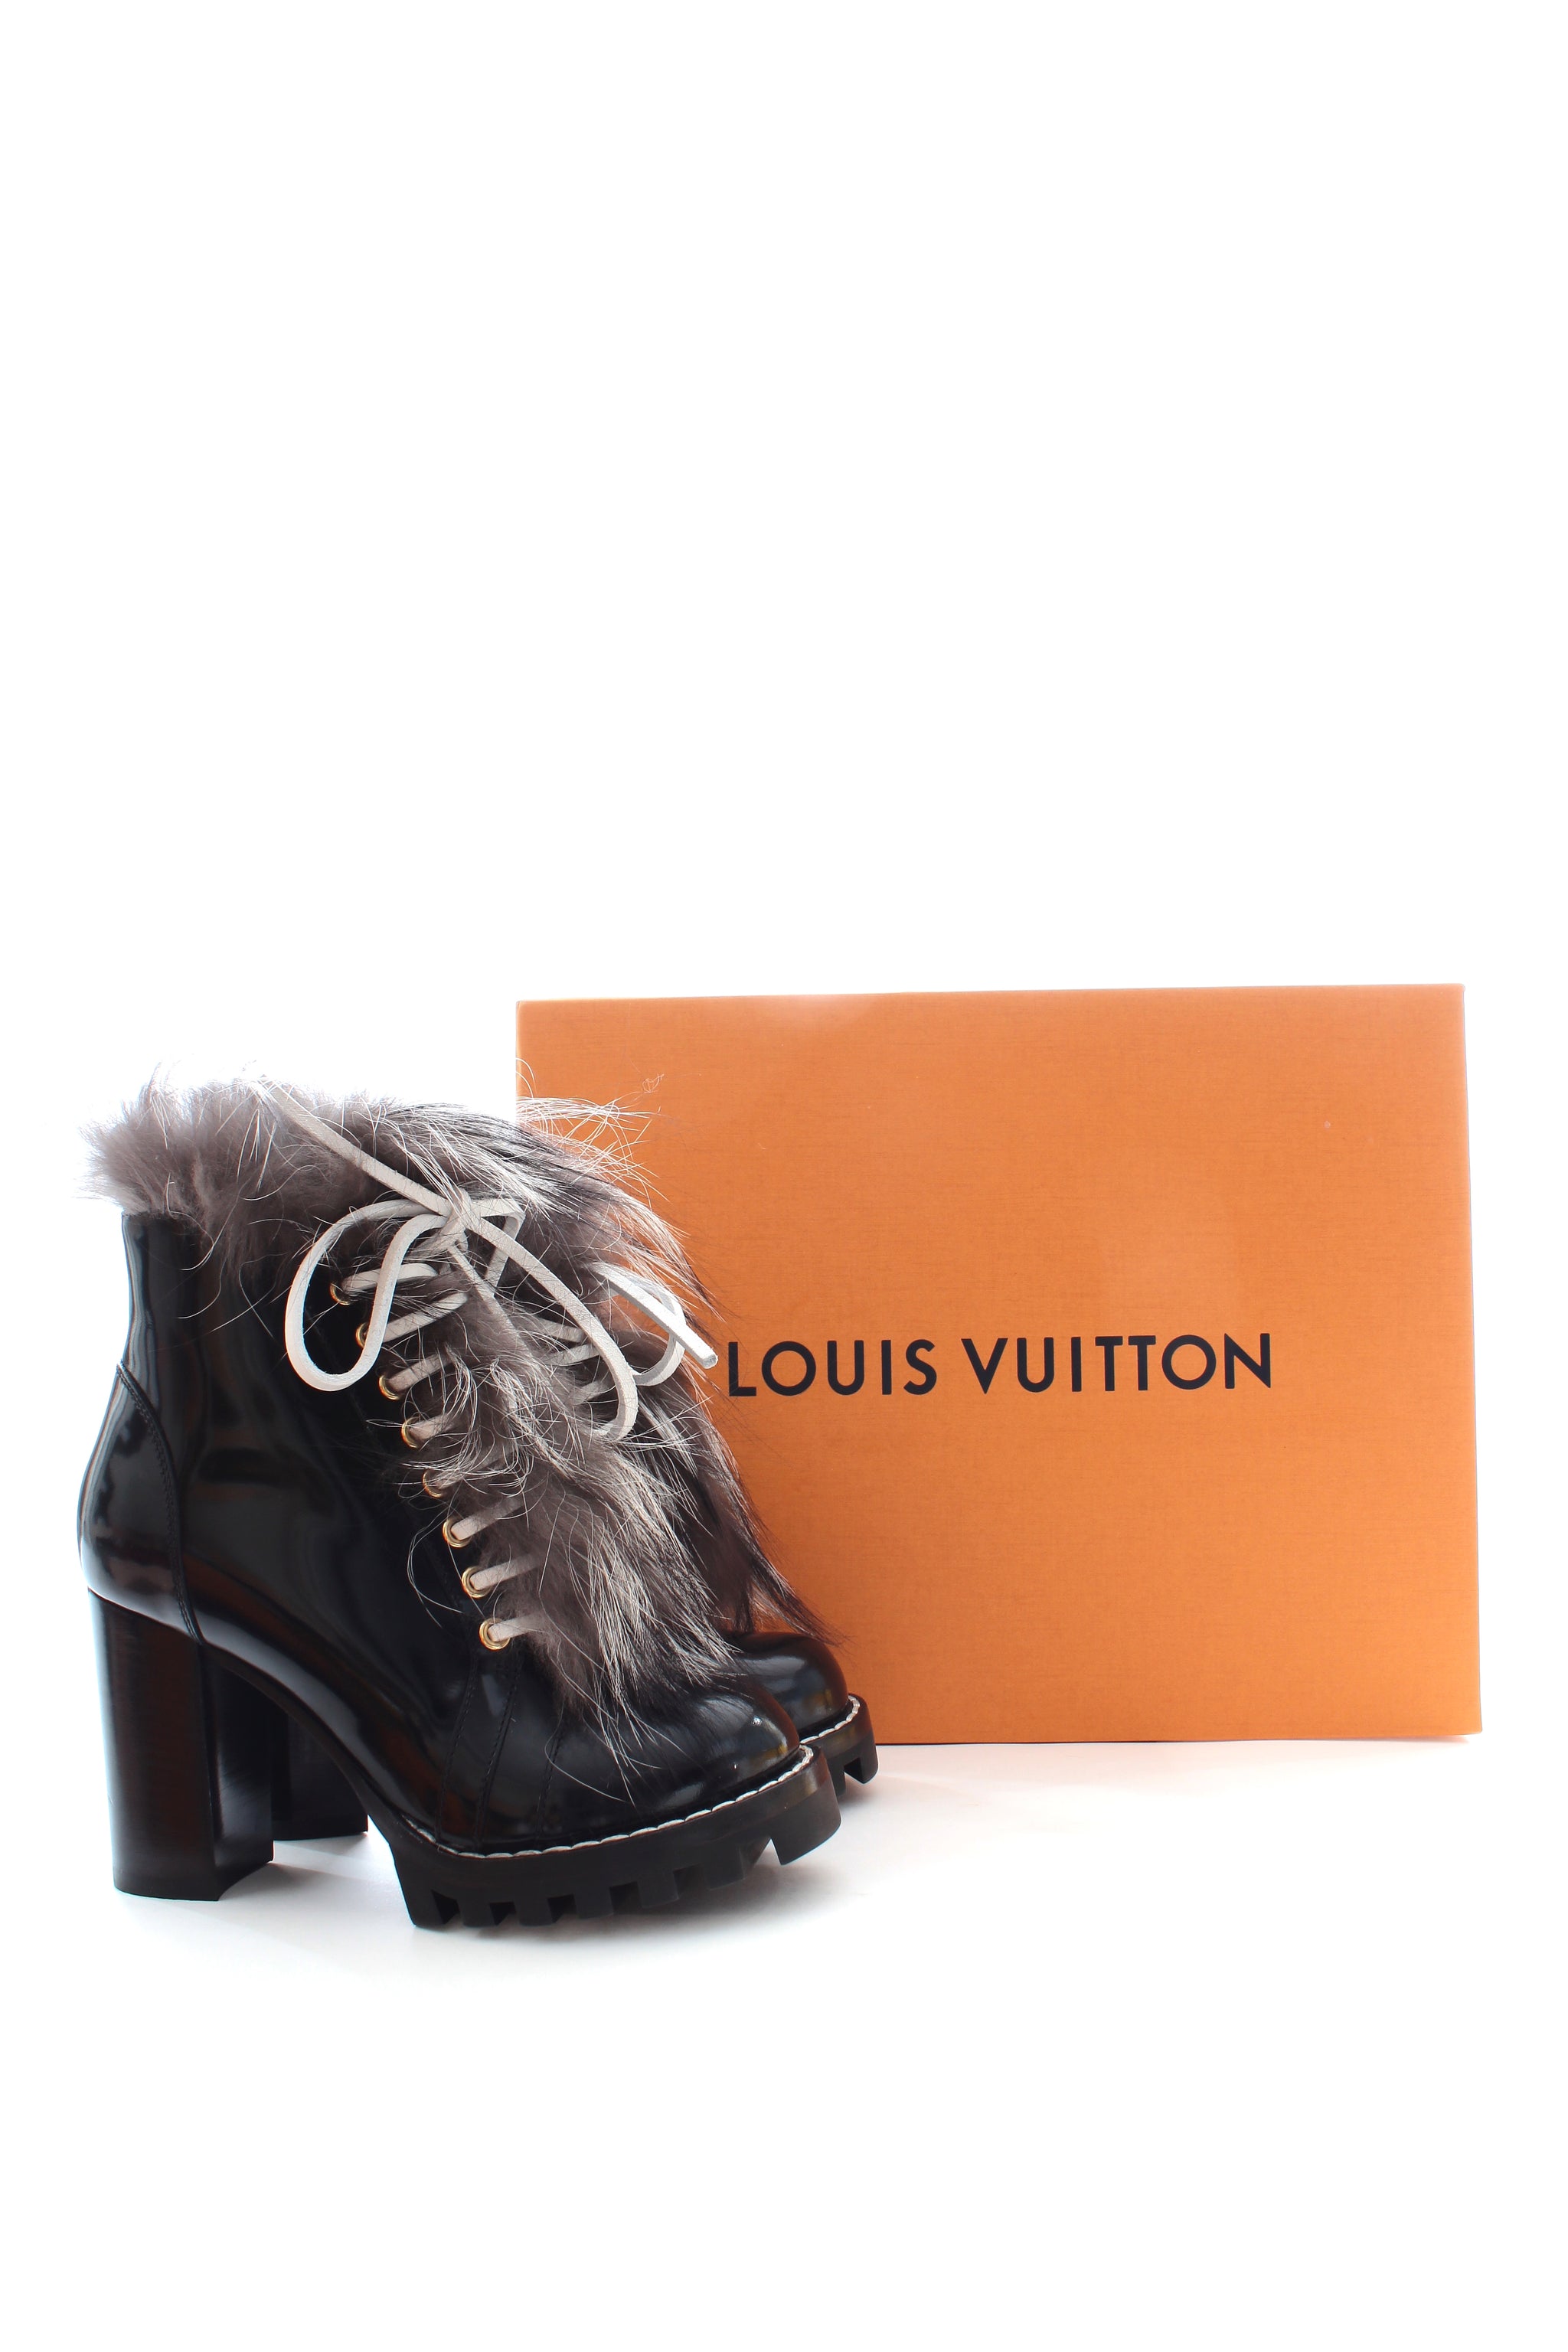 louis vuitton star trail ankle boot price